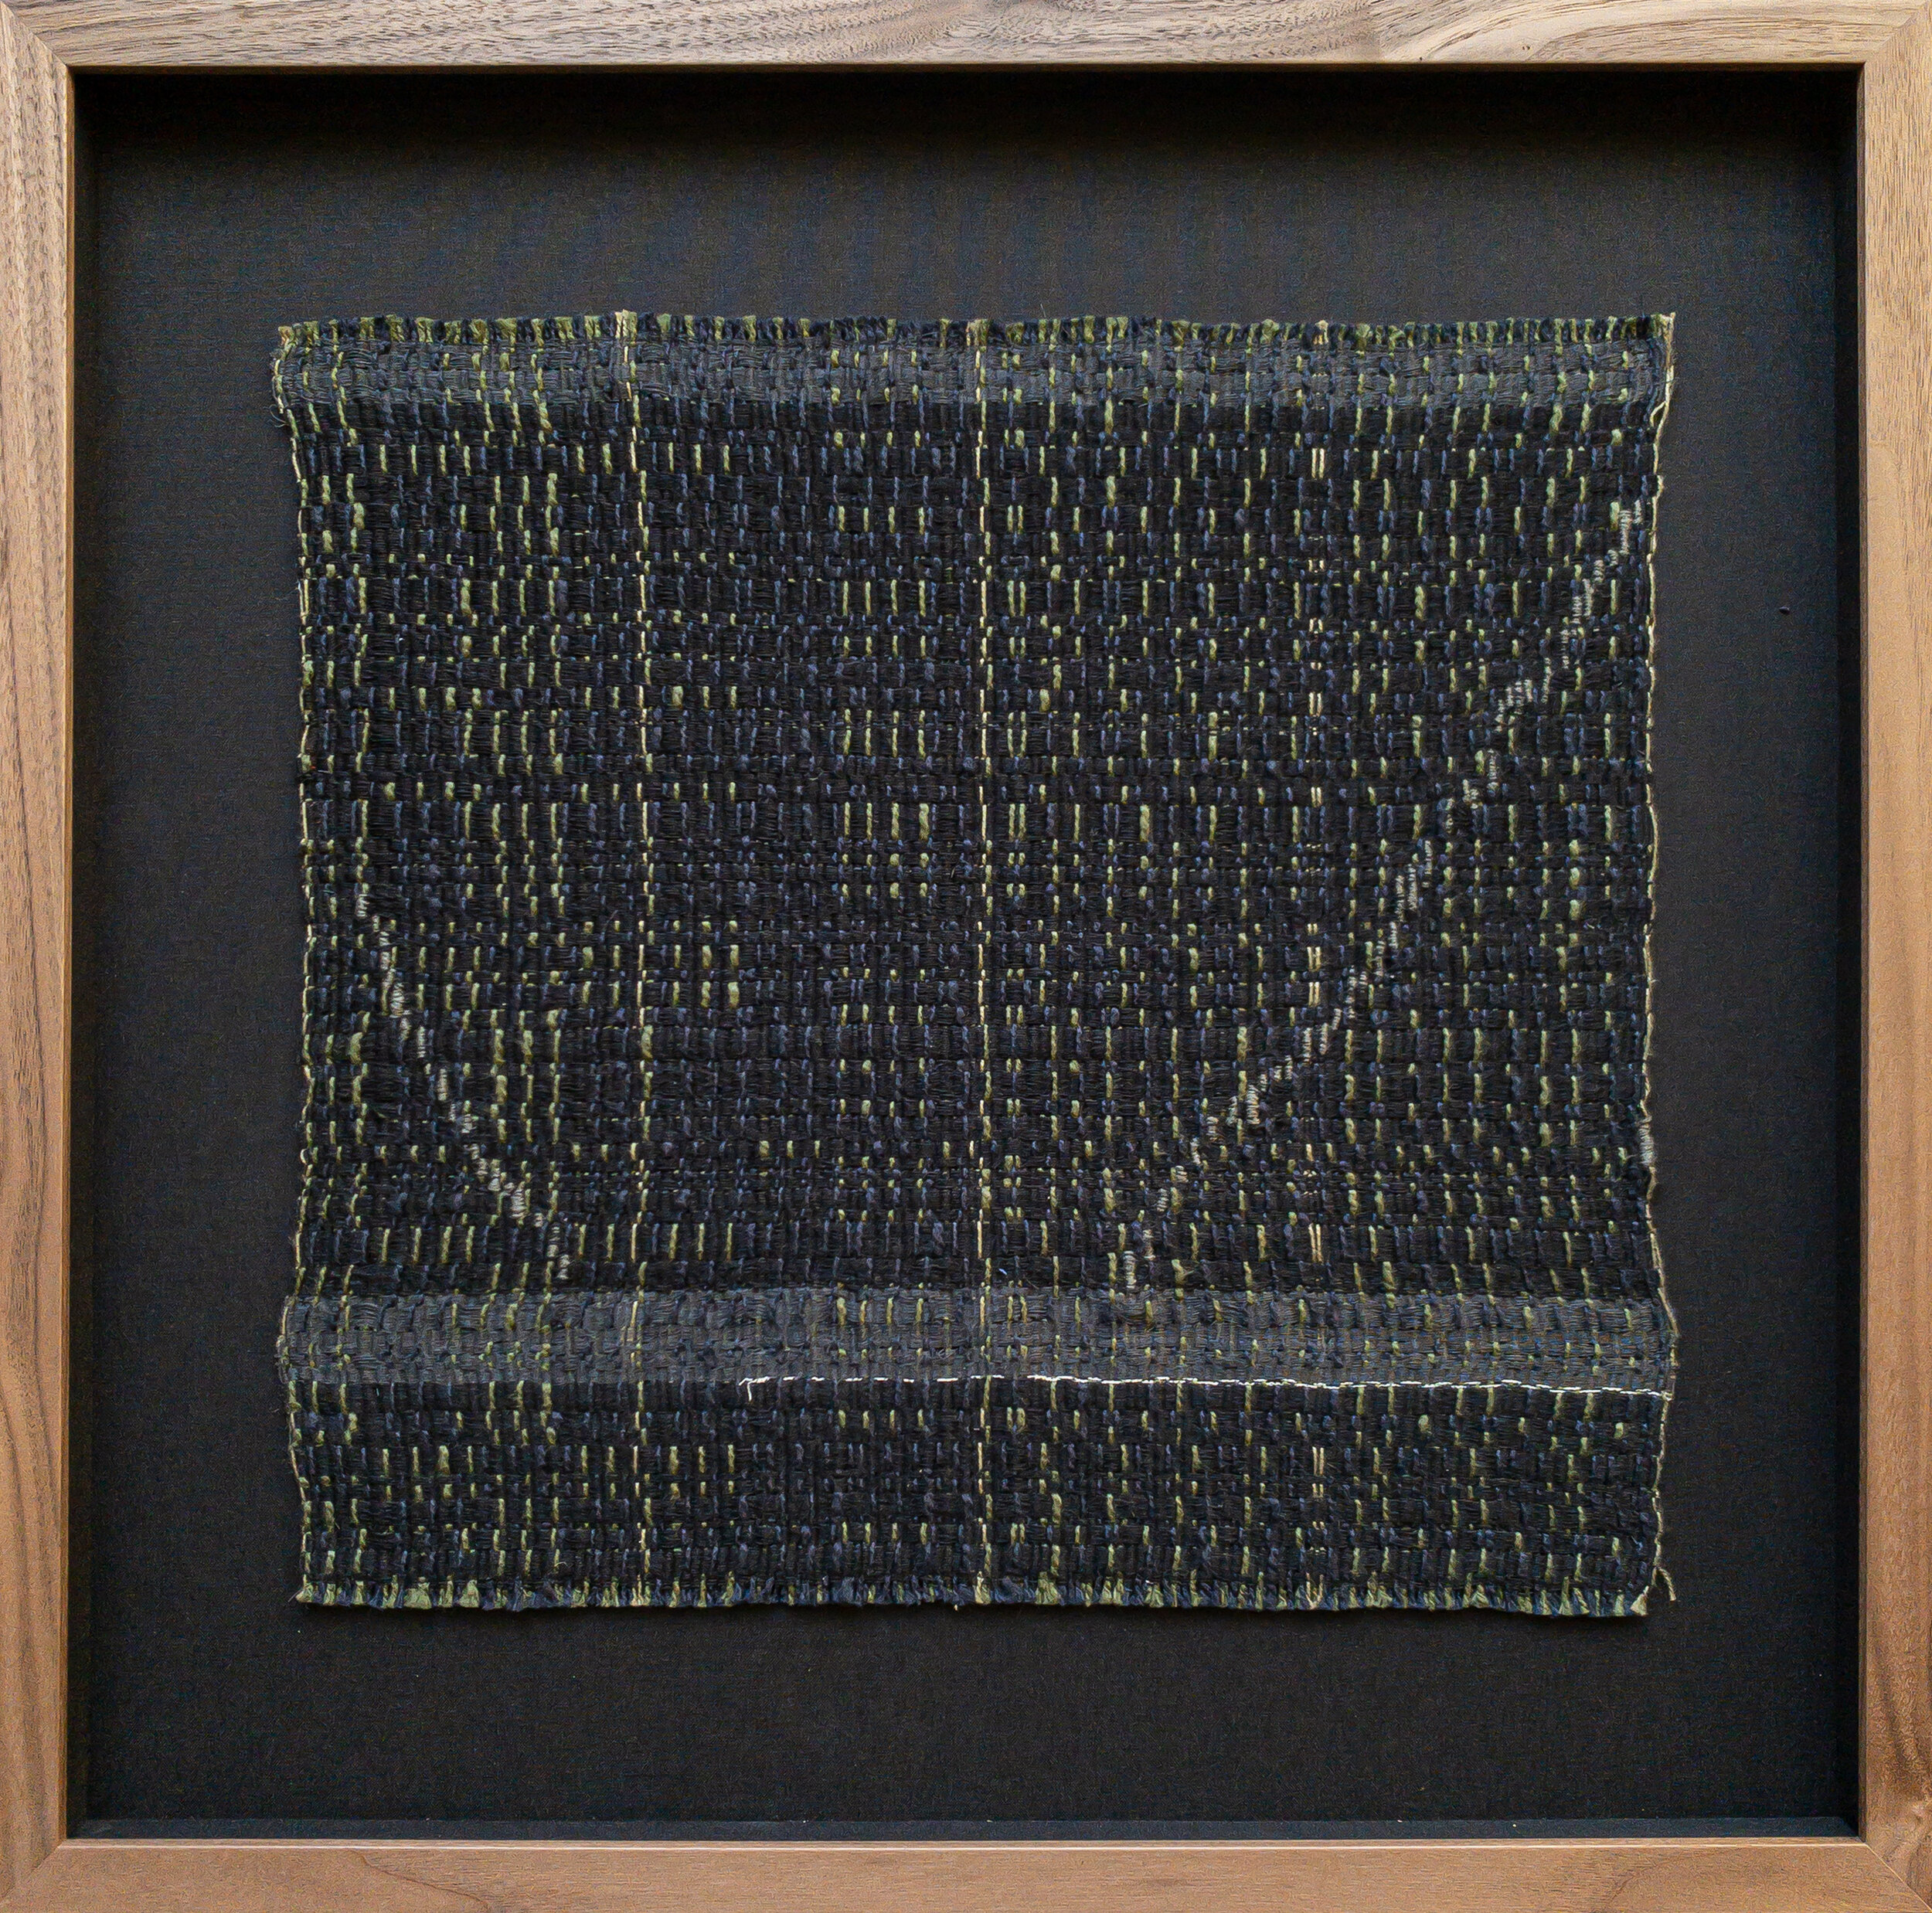 COLOUR AND WEAVE WARP IV, 2020, HANDWOVEN COTTON AND LINEN, 15" x 14.5" 